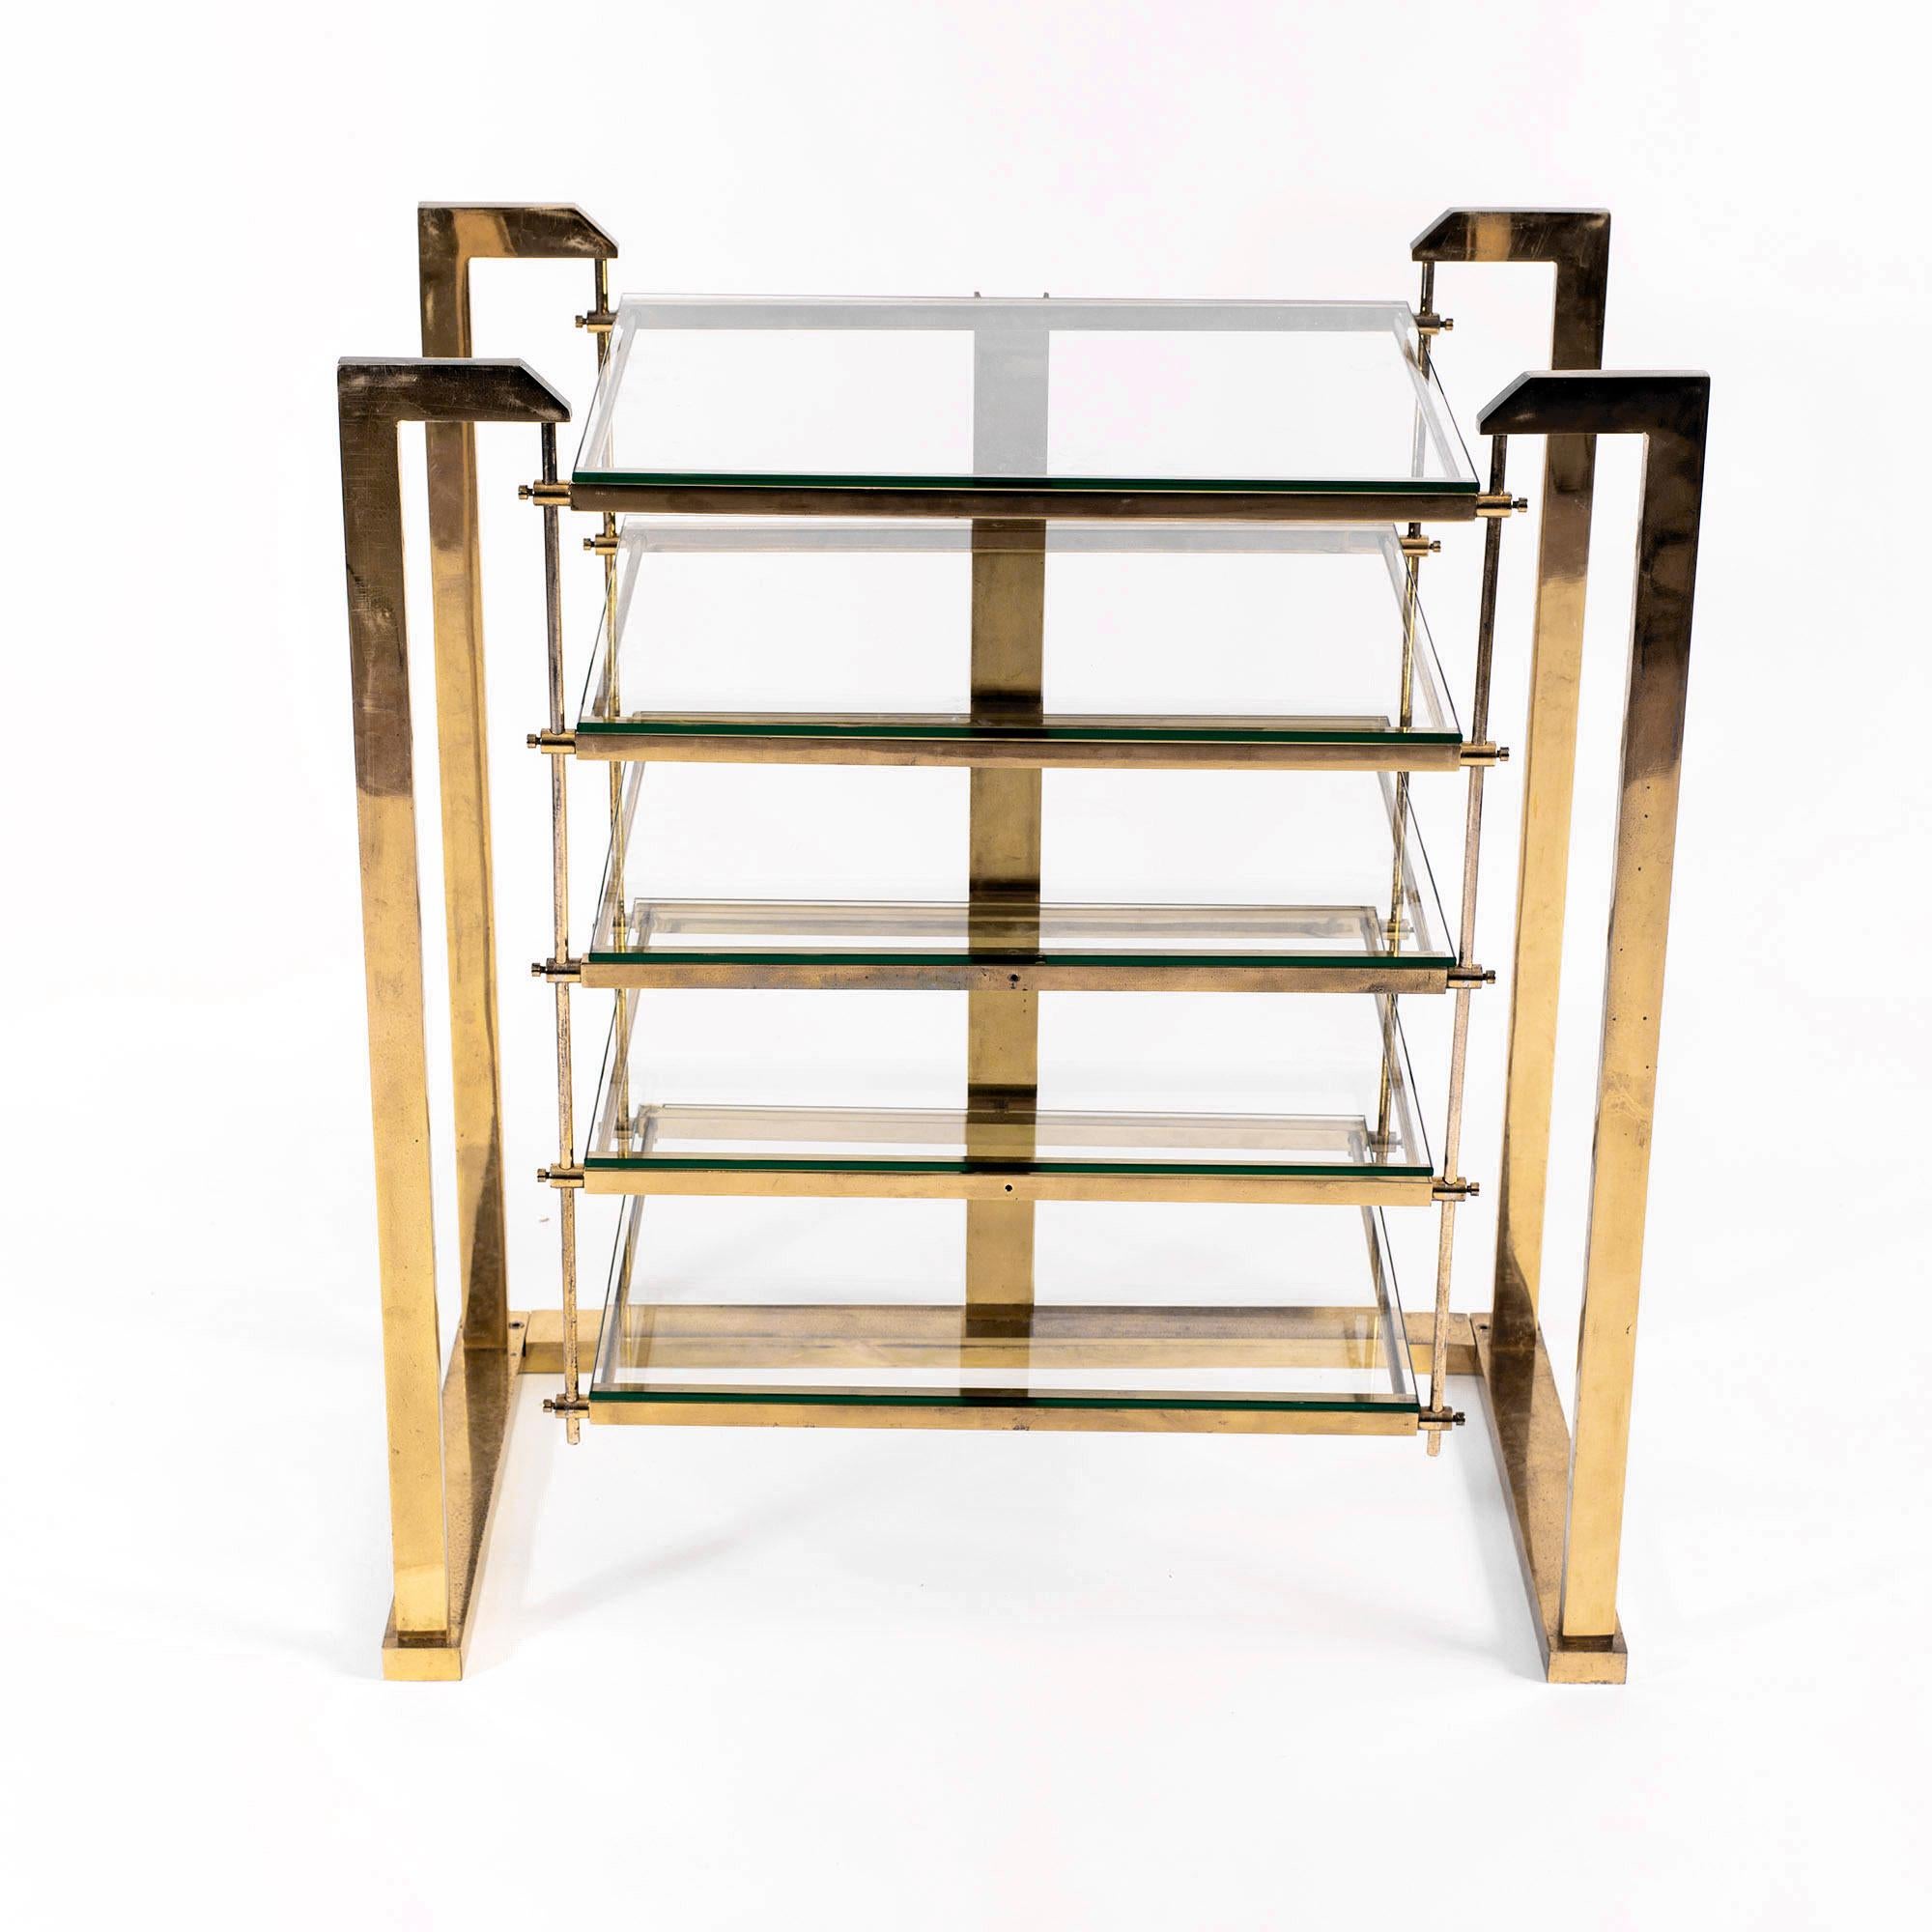 A stylish piece in style of Romeo Rega and Hollywood Regency that can be used as a shelving unit or audio rack. It features an elegant geometric brass structure and five heavy glass shelves.